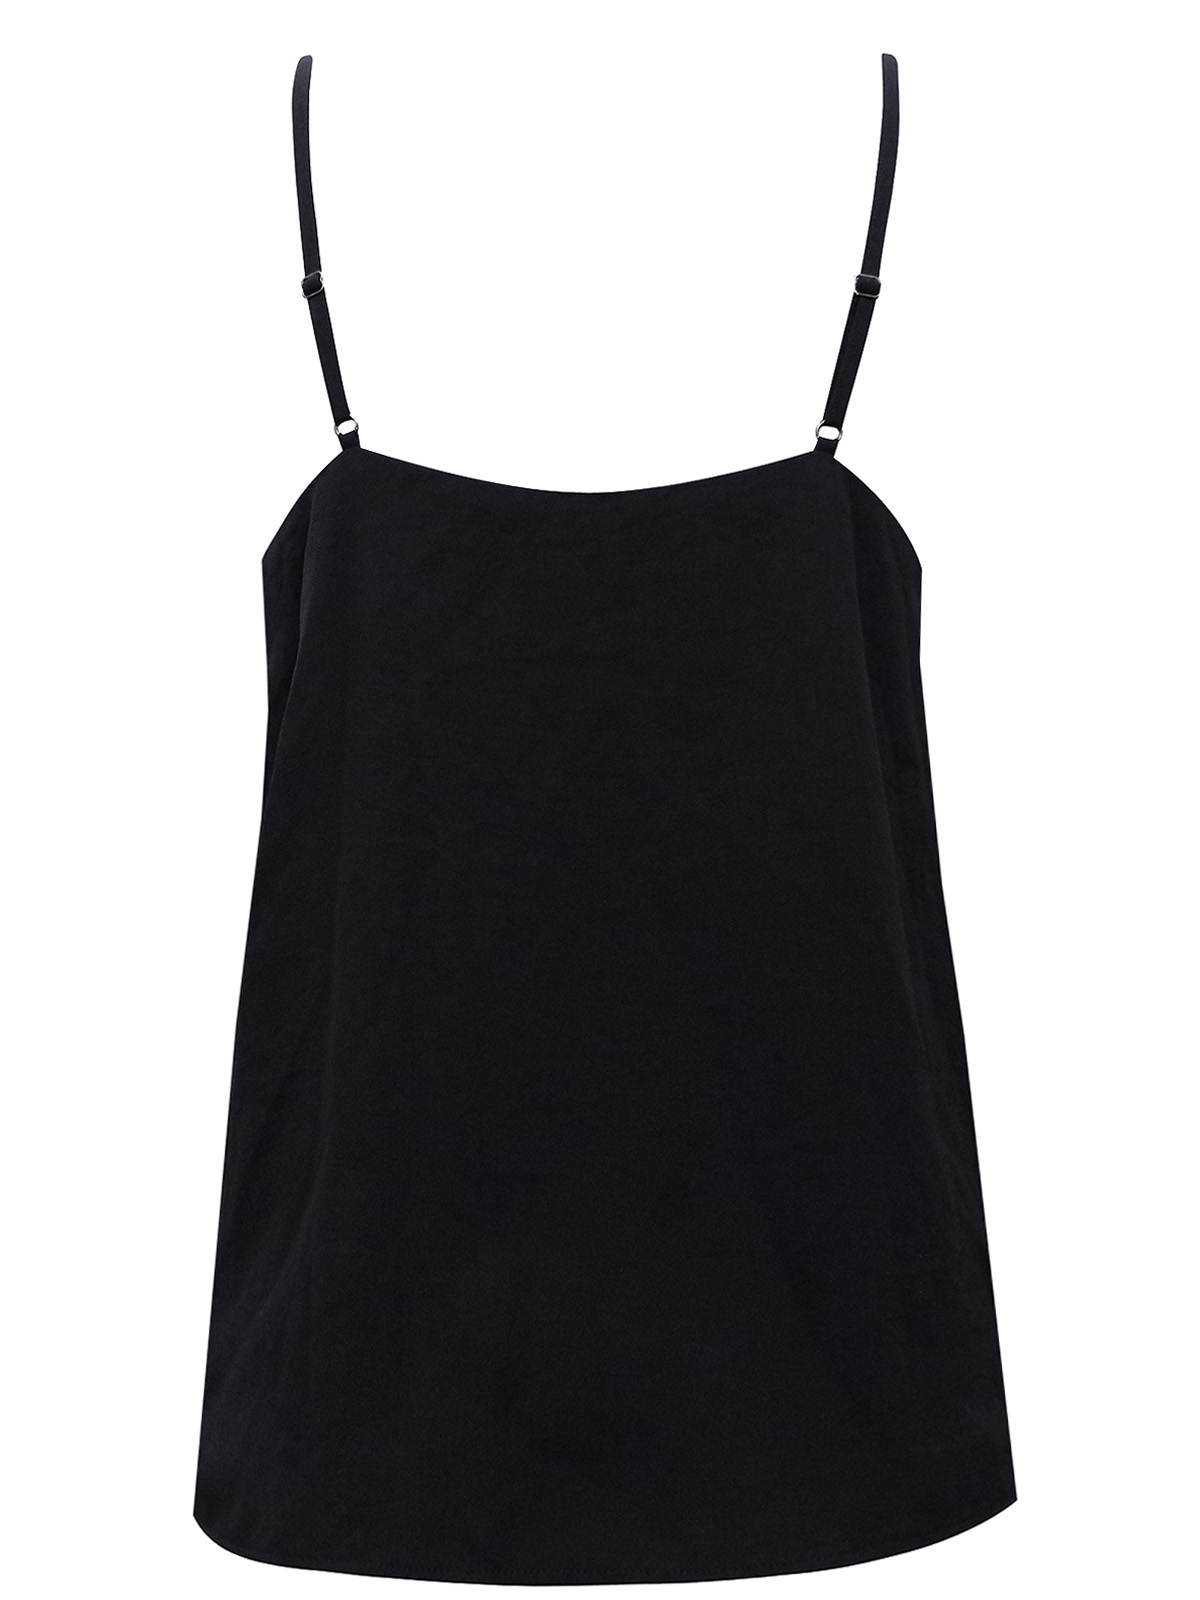 N3XT BLACK Strappy Cami Top - Size 6 to 20